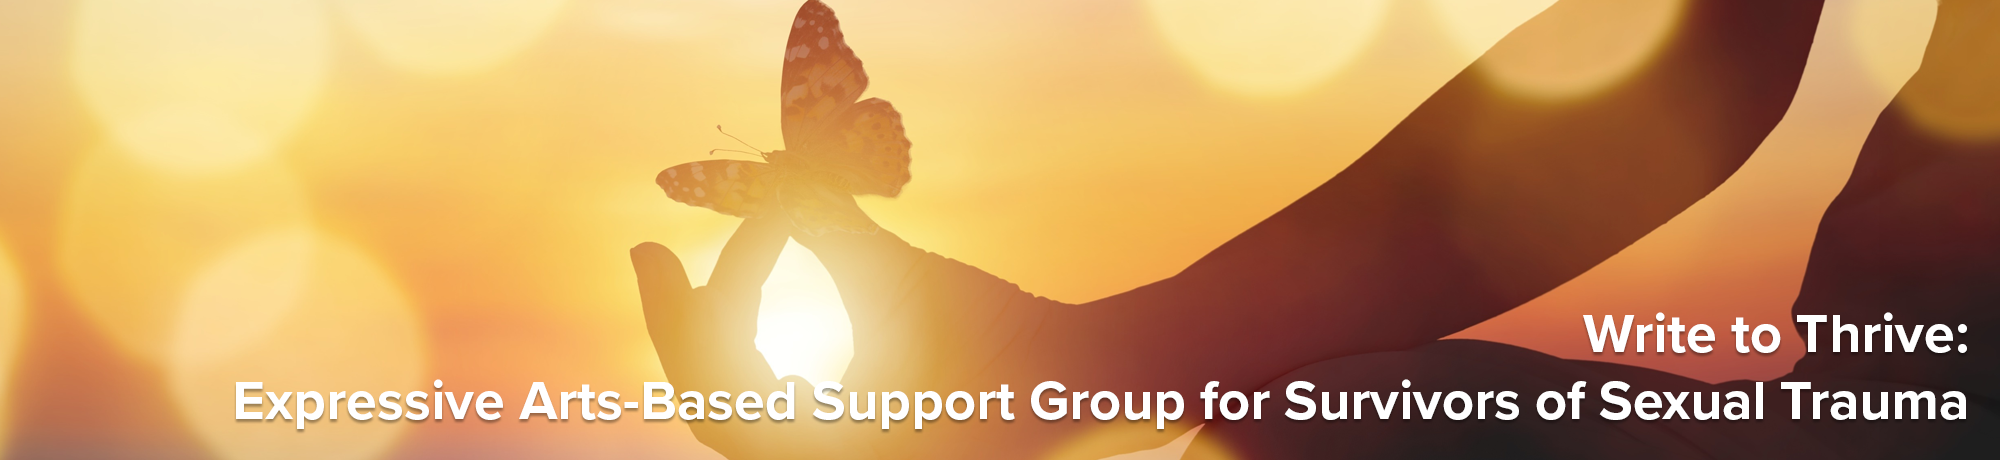 Write to Thrive: Expressive Arts-Based Support Group for Survivors of Sexual Trauma Group Banner